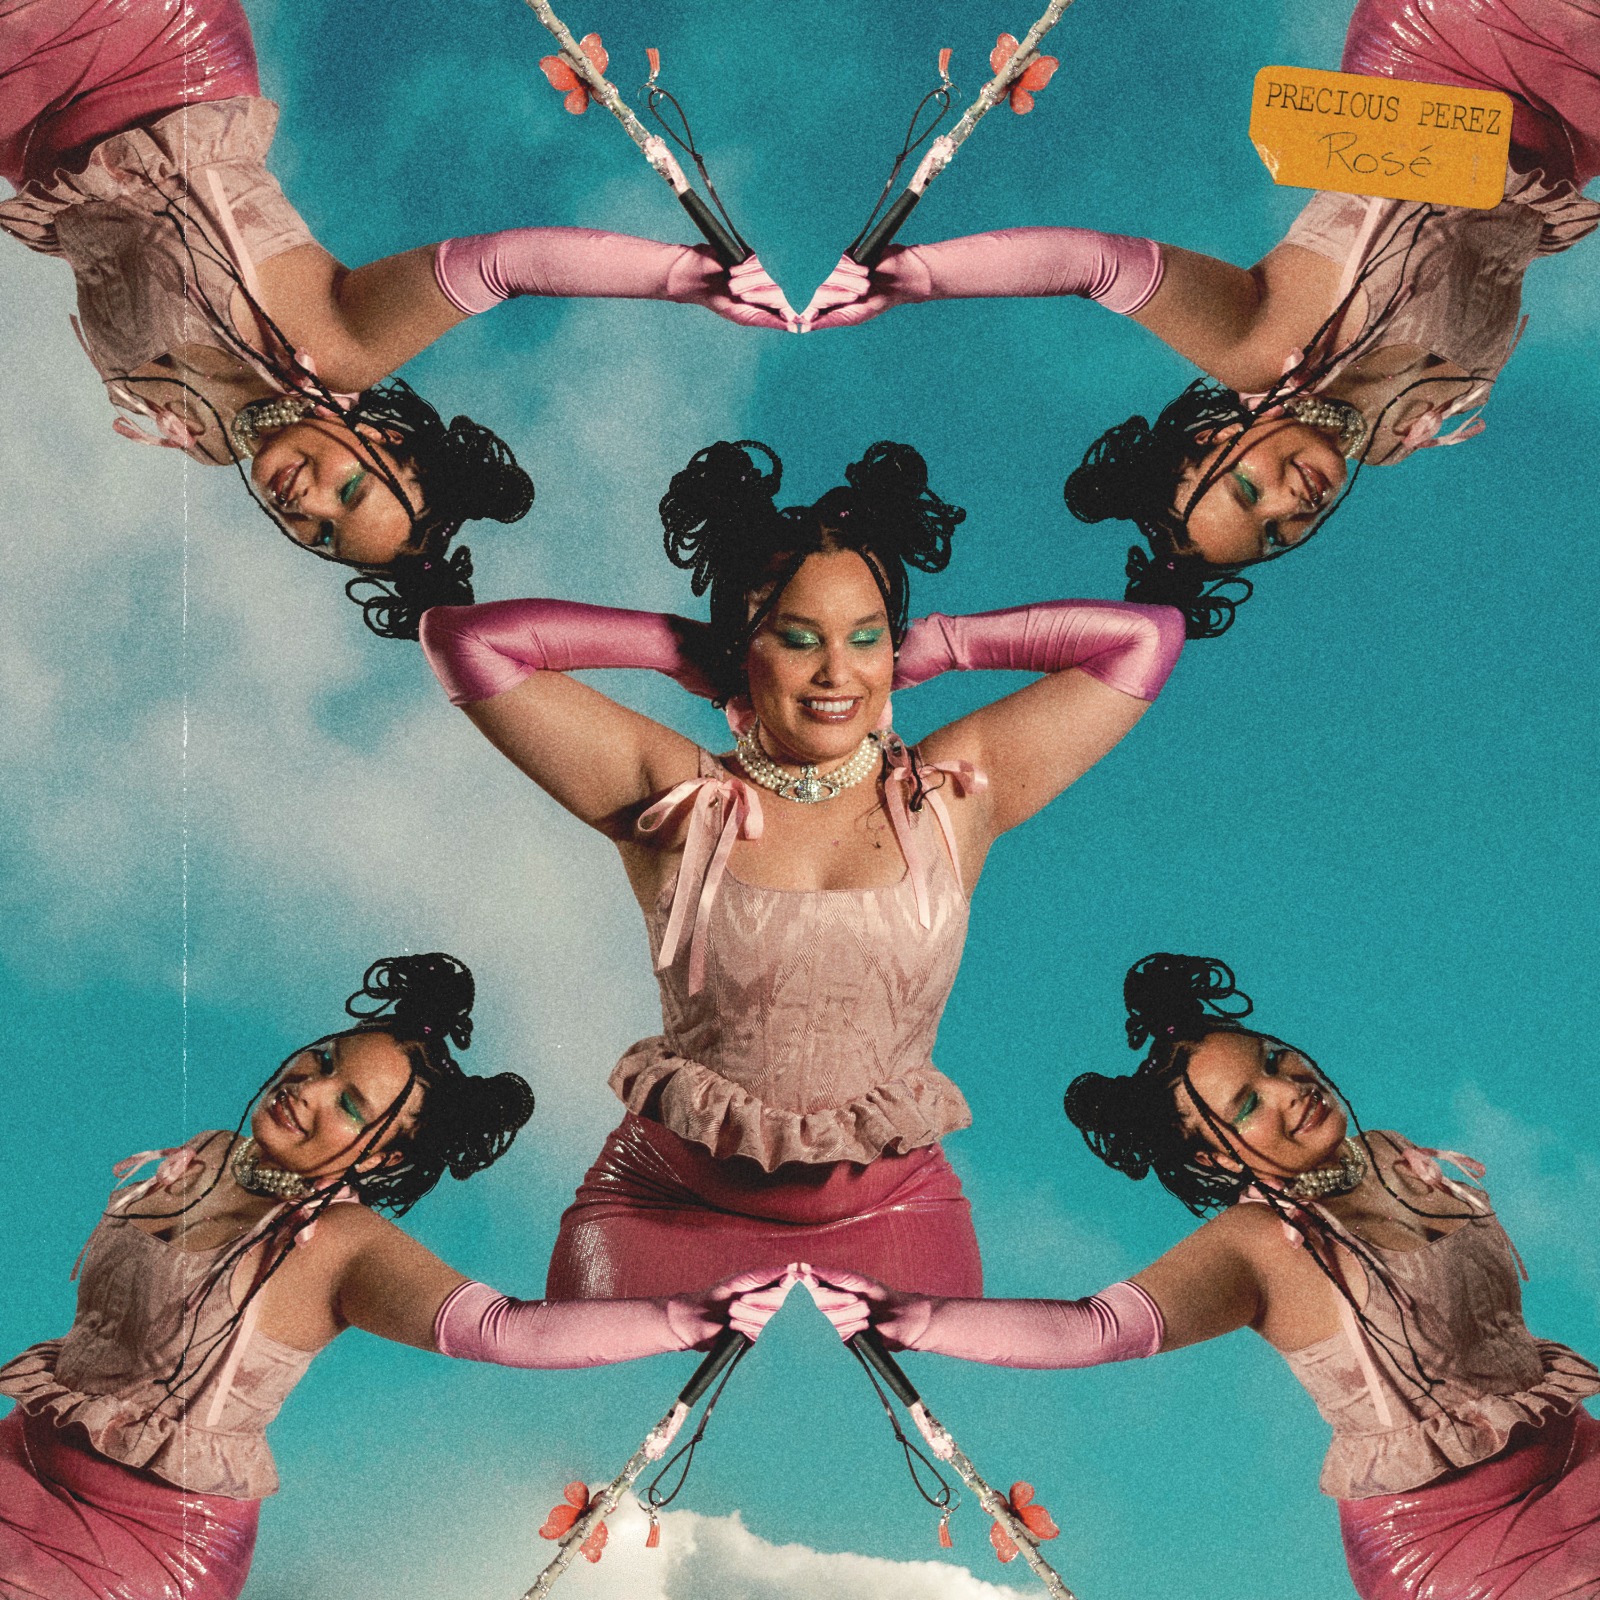 A photo that creates a kaleidoscope effect with five images of Precious. In the center image, she looks chill with her hands behind her head. In the four 